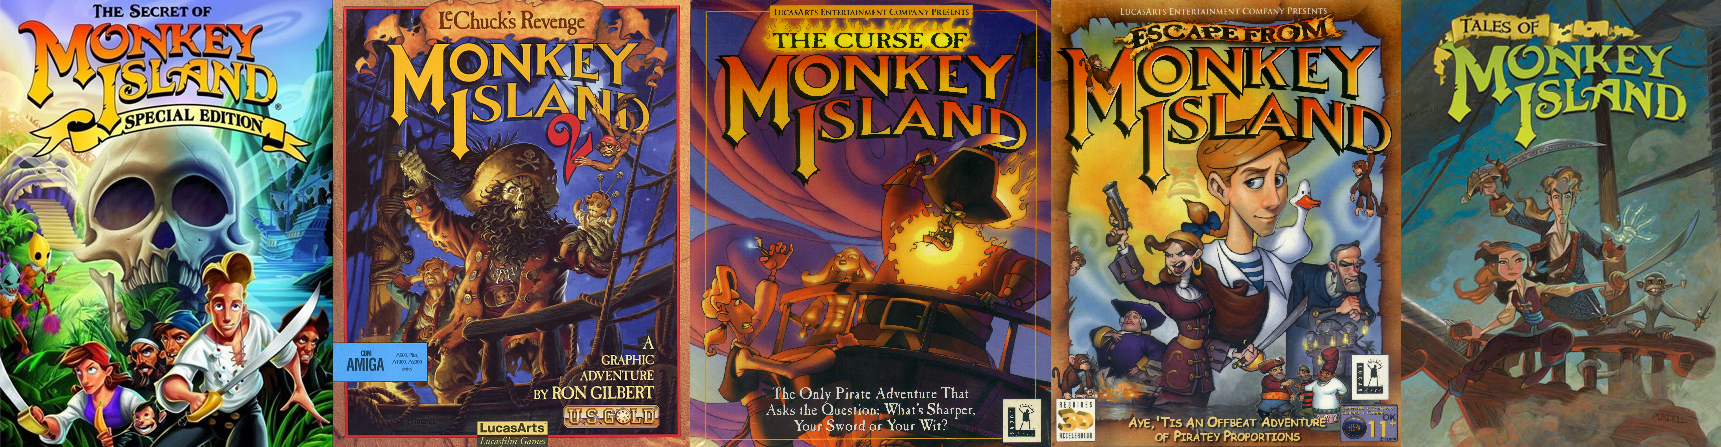 escape from monkey island special edition torrent